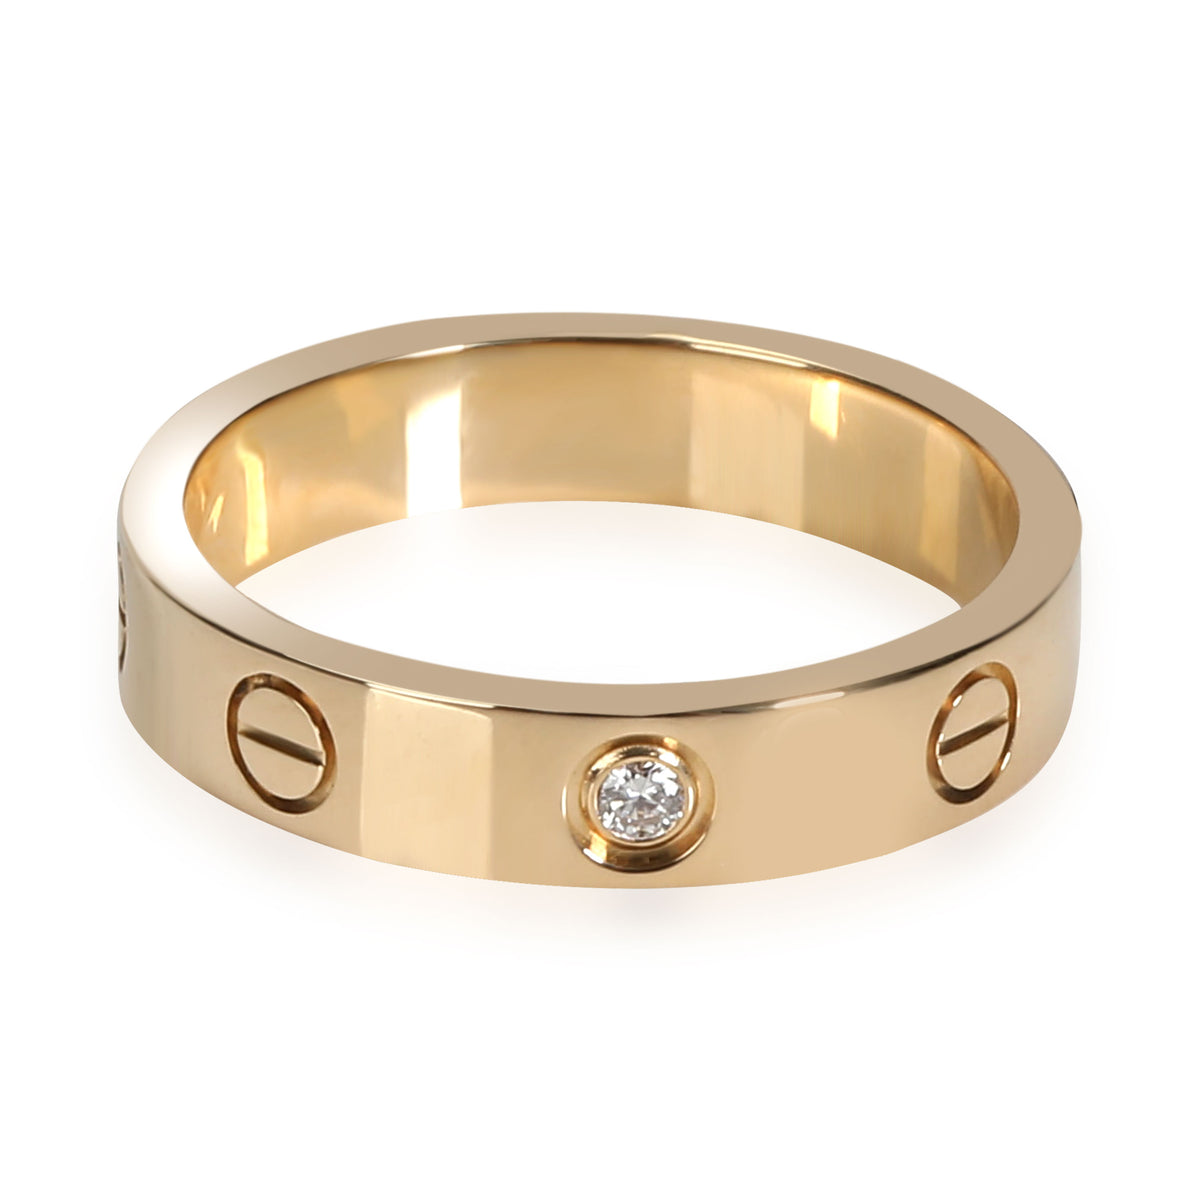 Cartier Love Diamond Ring in 18K Yellow Gold 0.02 CTW